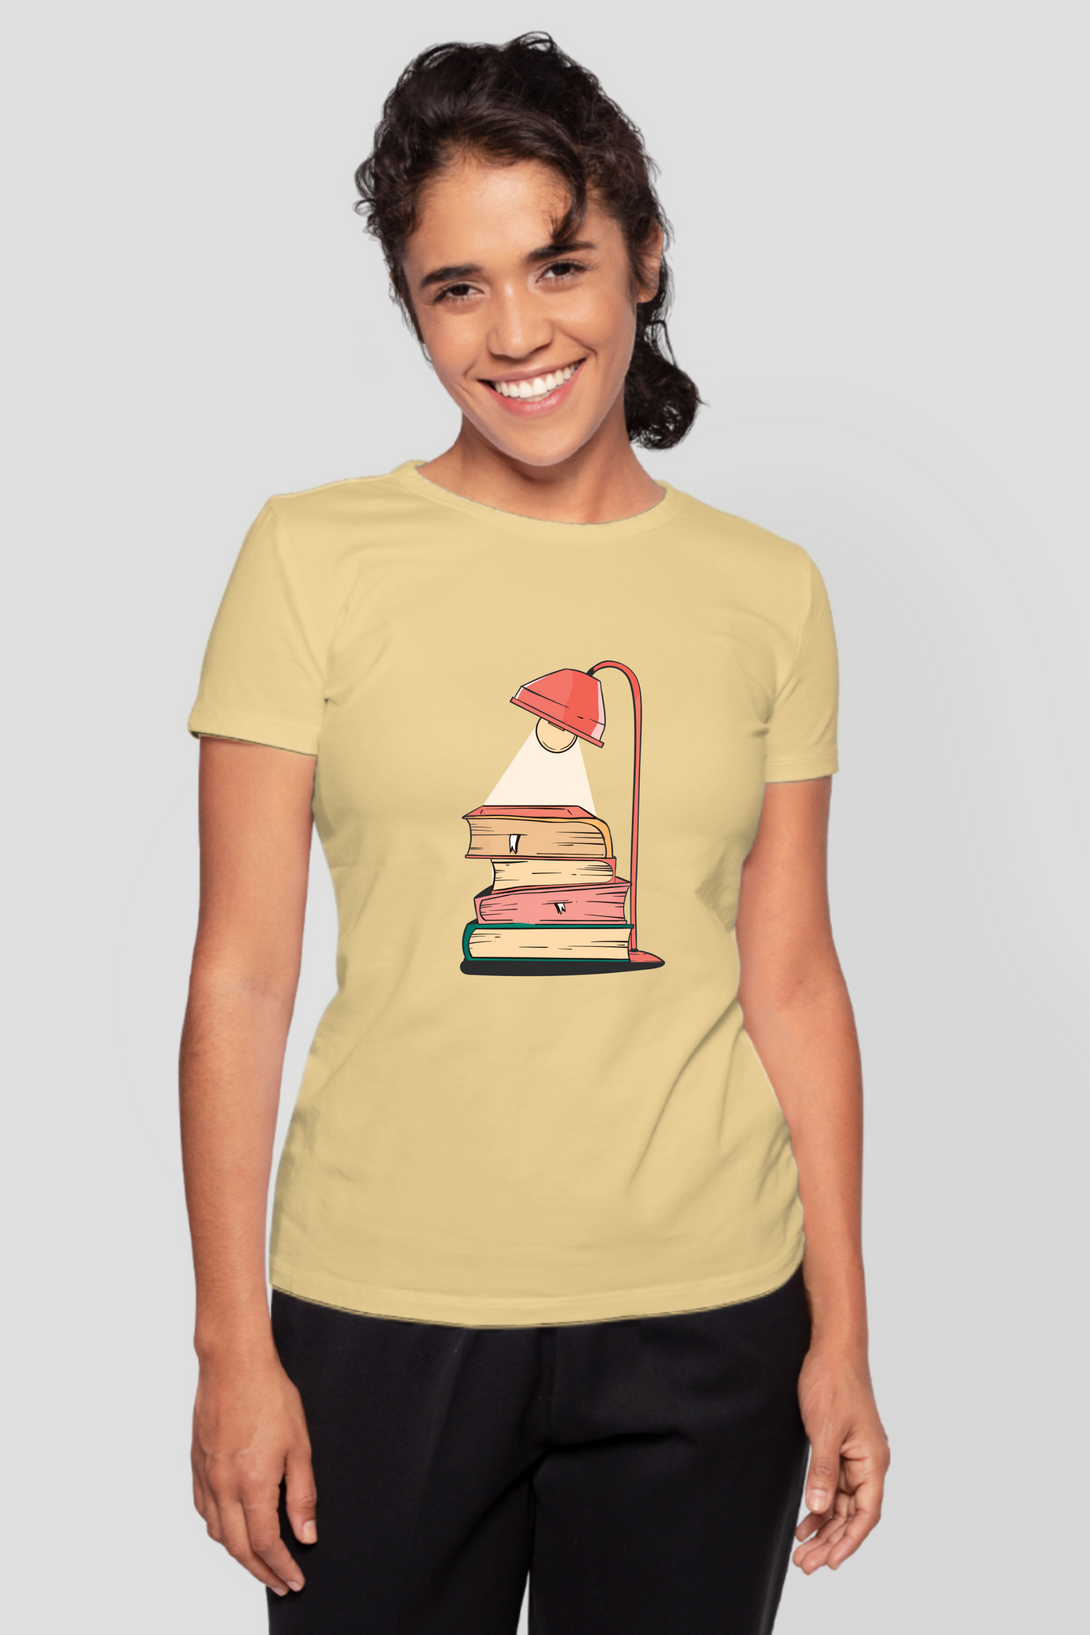 Lamp Of Knowledge Printed T-Shirt For Women - WowWaves - 12